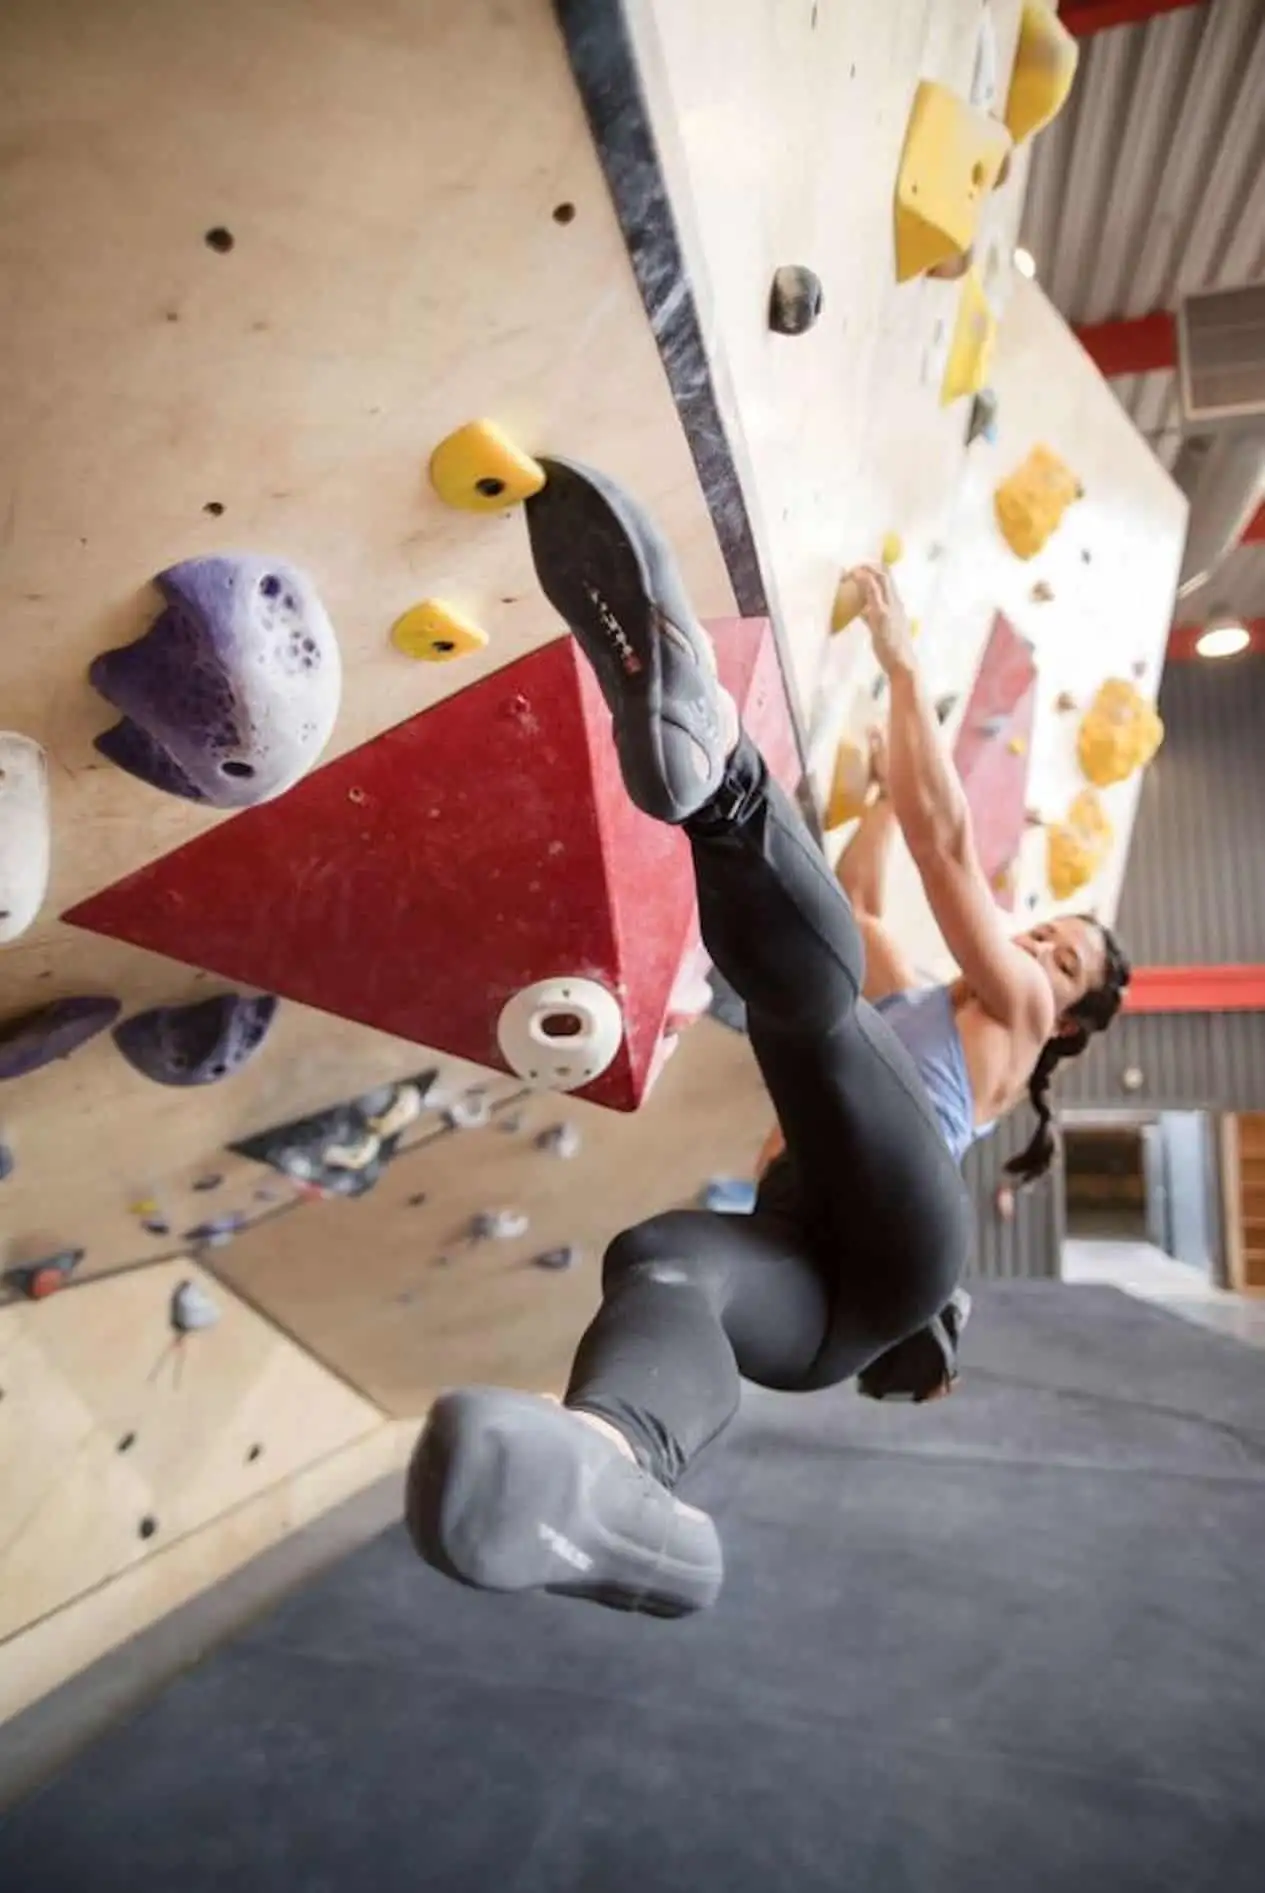 What To Wear For Rock Climbing: Best Tips And Ideas For Women